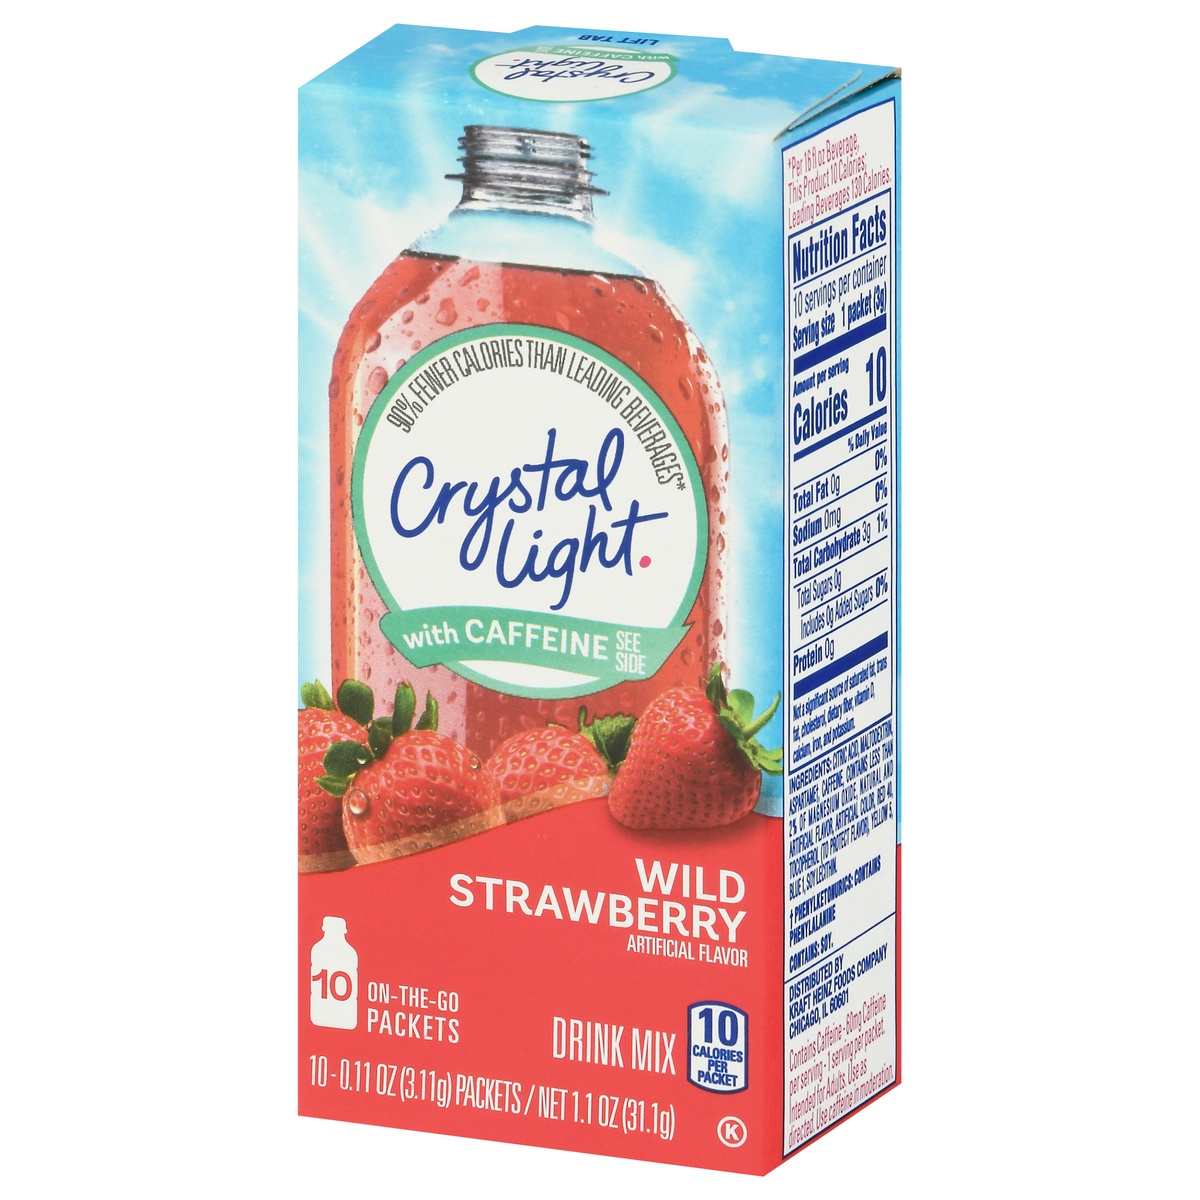 slide 5 of 10, Crystal Light Wild Strawberry Artificially Flavored Powdered Drink Mix with Caffeine On-the-Go-Packets, 10 ct; 0.11 oz